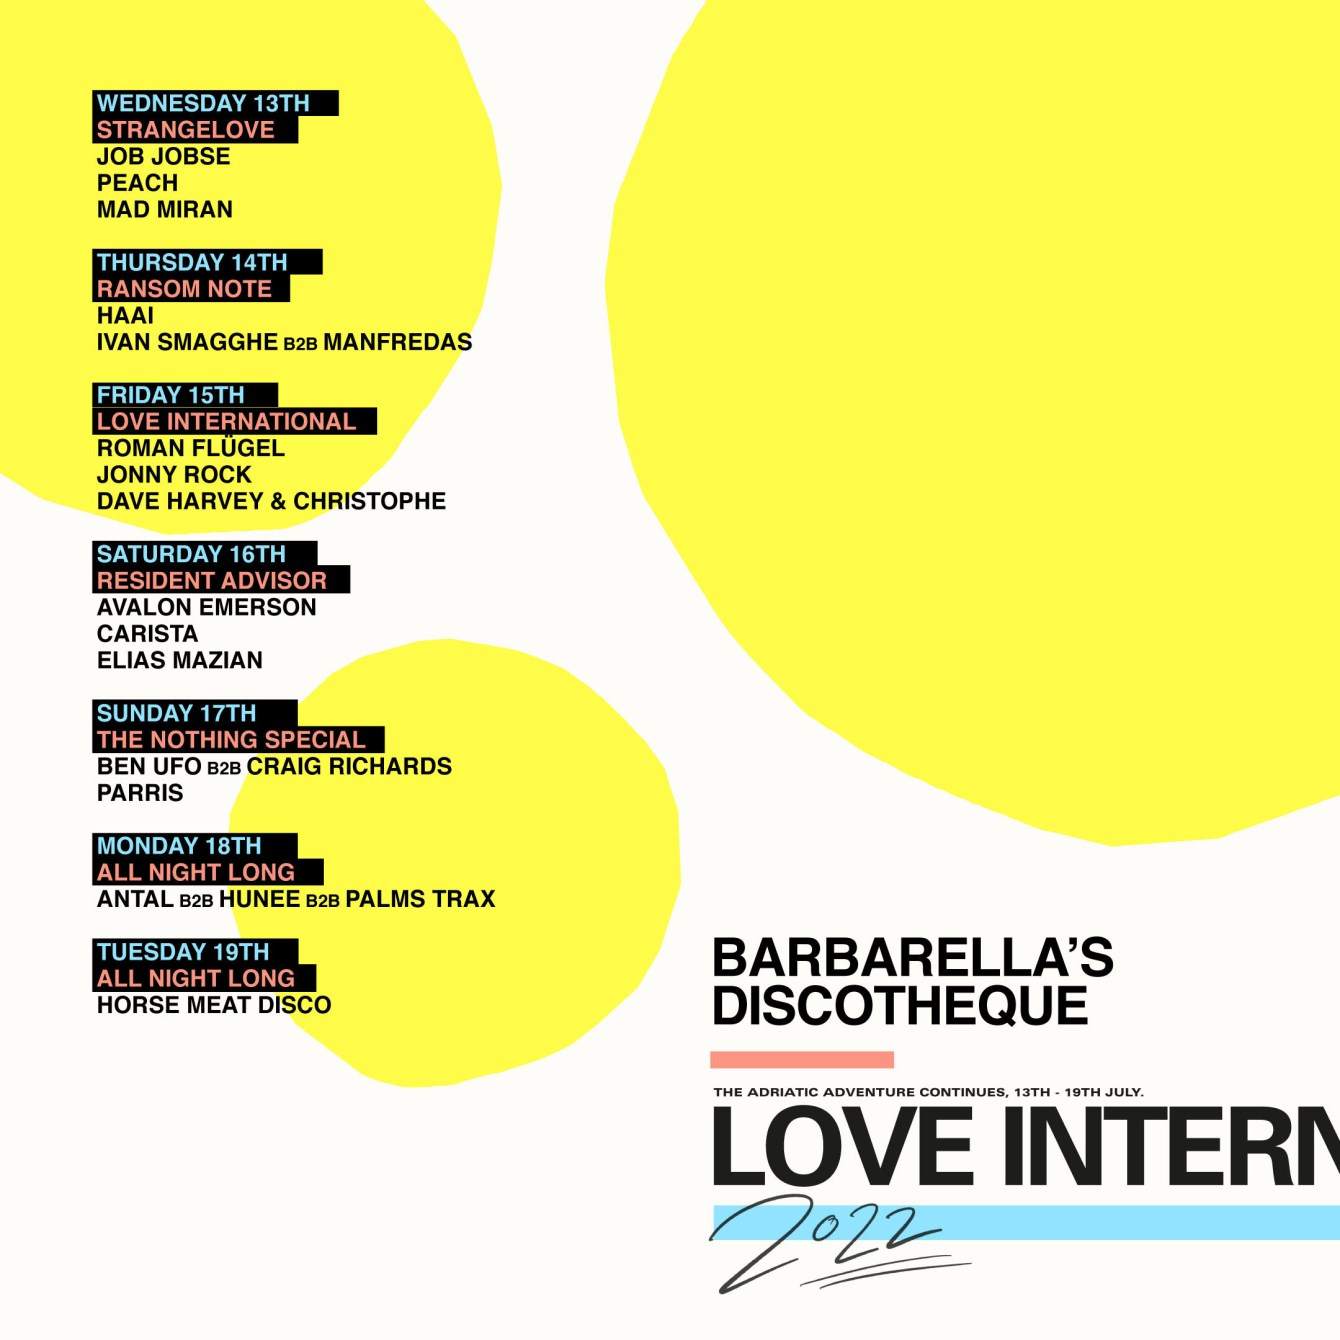 Barberalla’s Discotheque: Opening Party with Strangelove - Página frontal